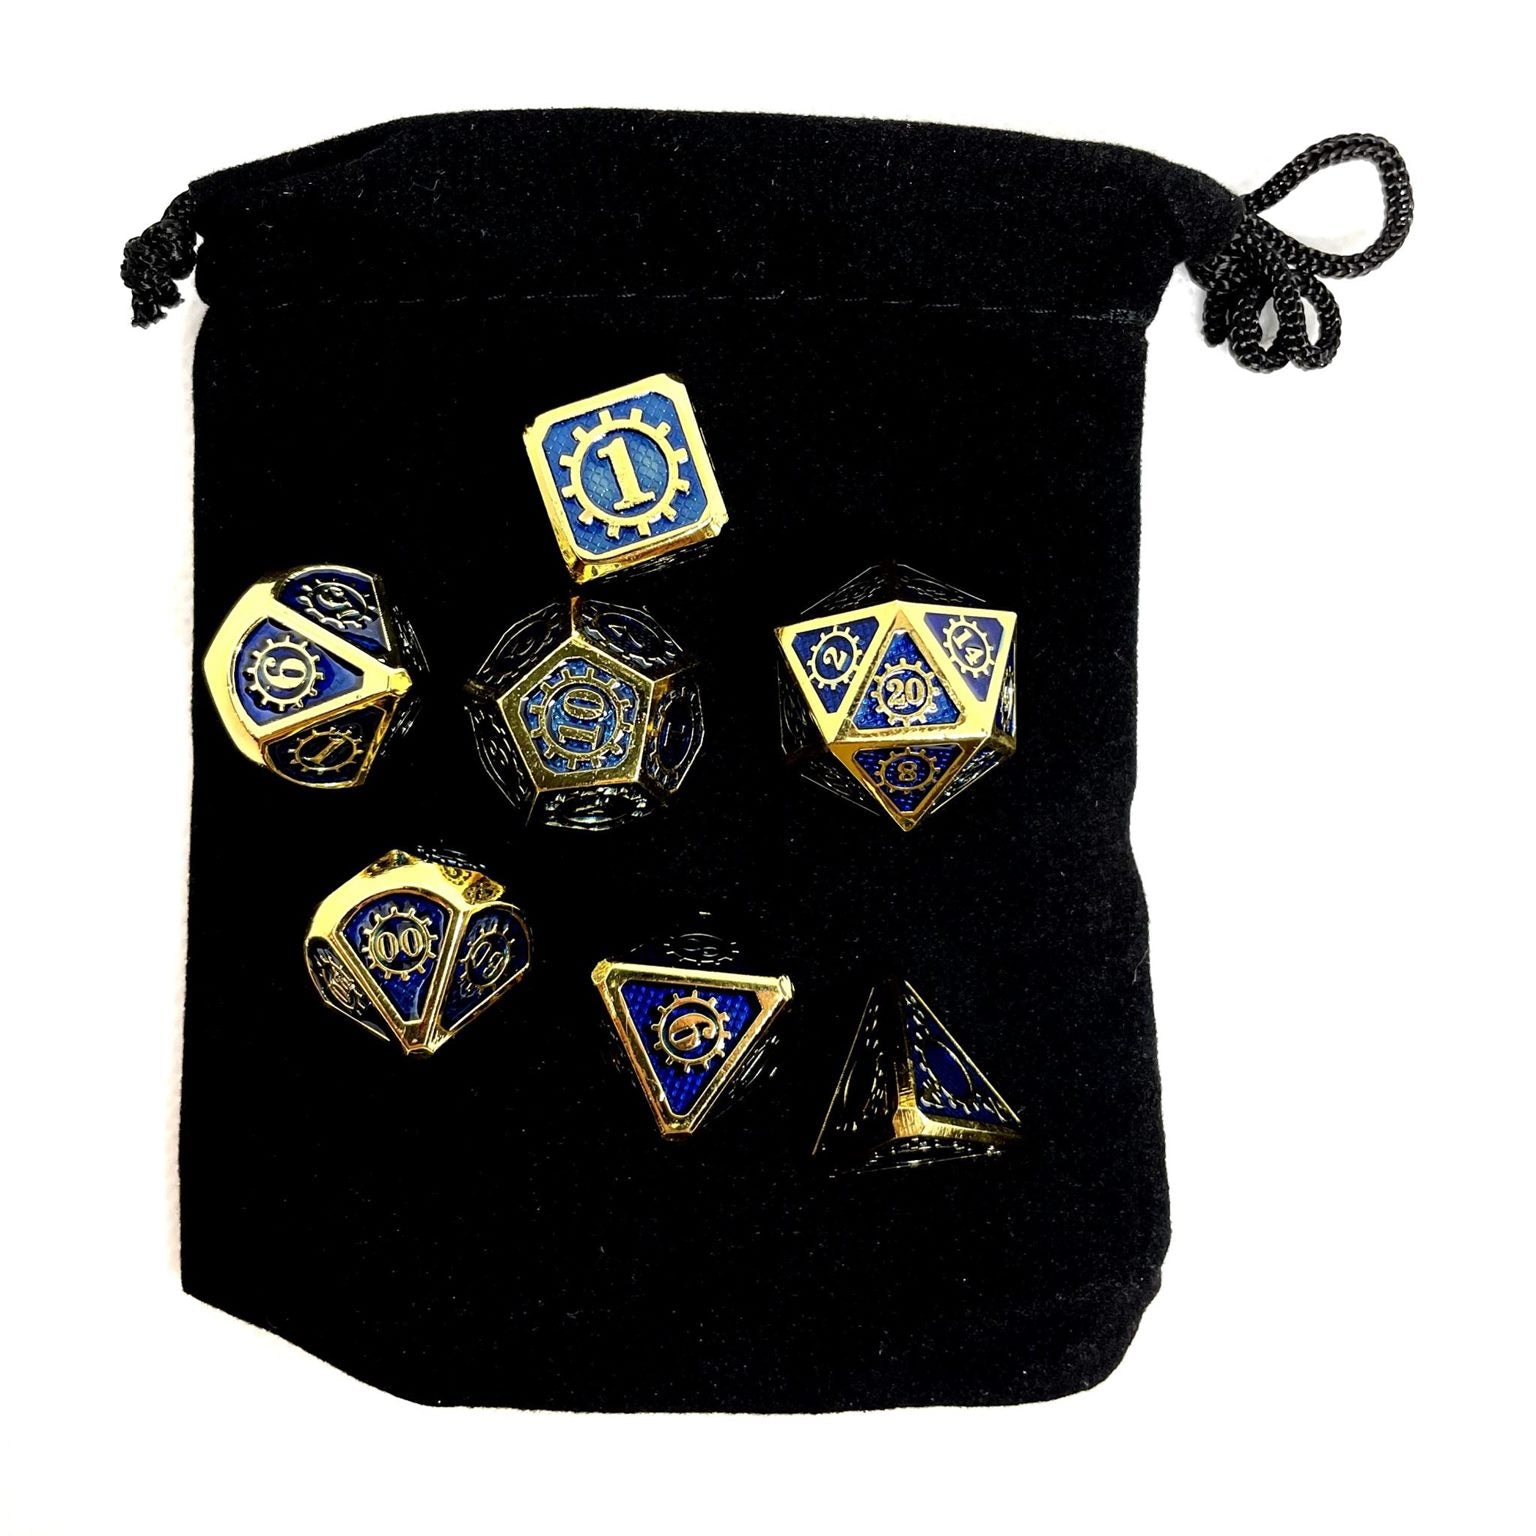 Duergar metal dnd dice set of 7 steampunk blue and gold on top of black dice pouch